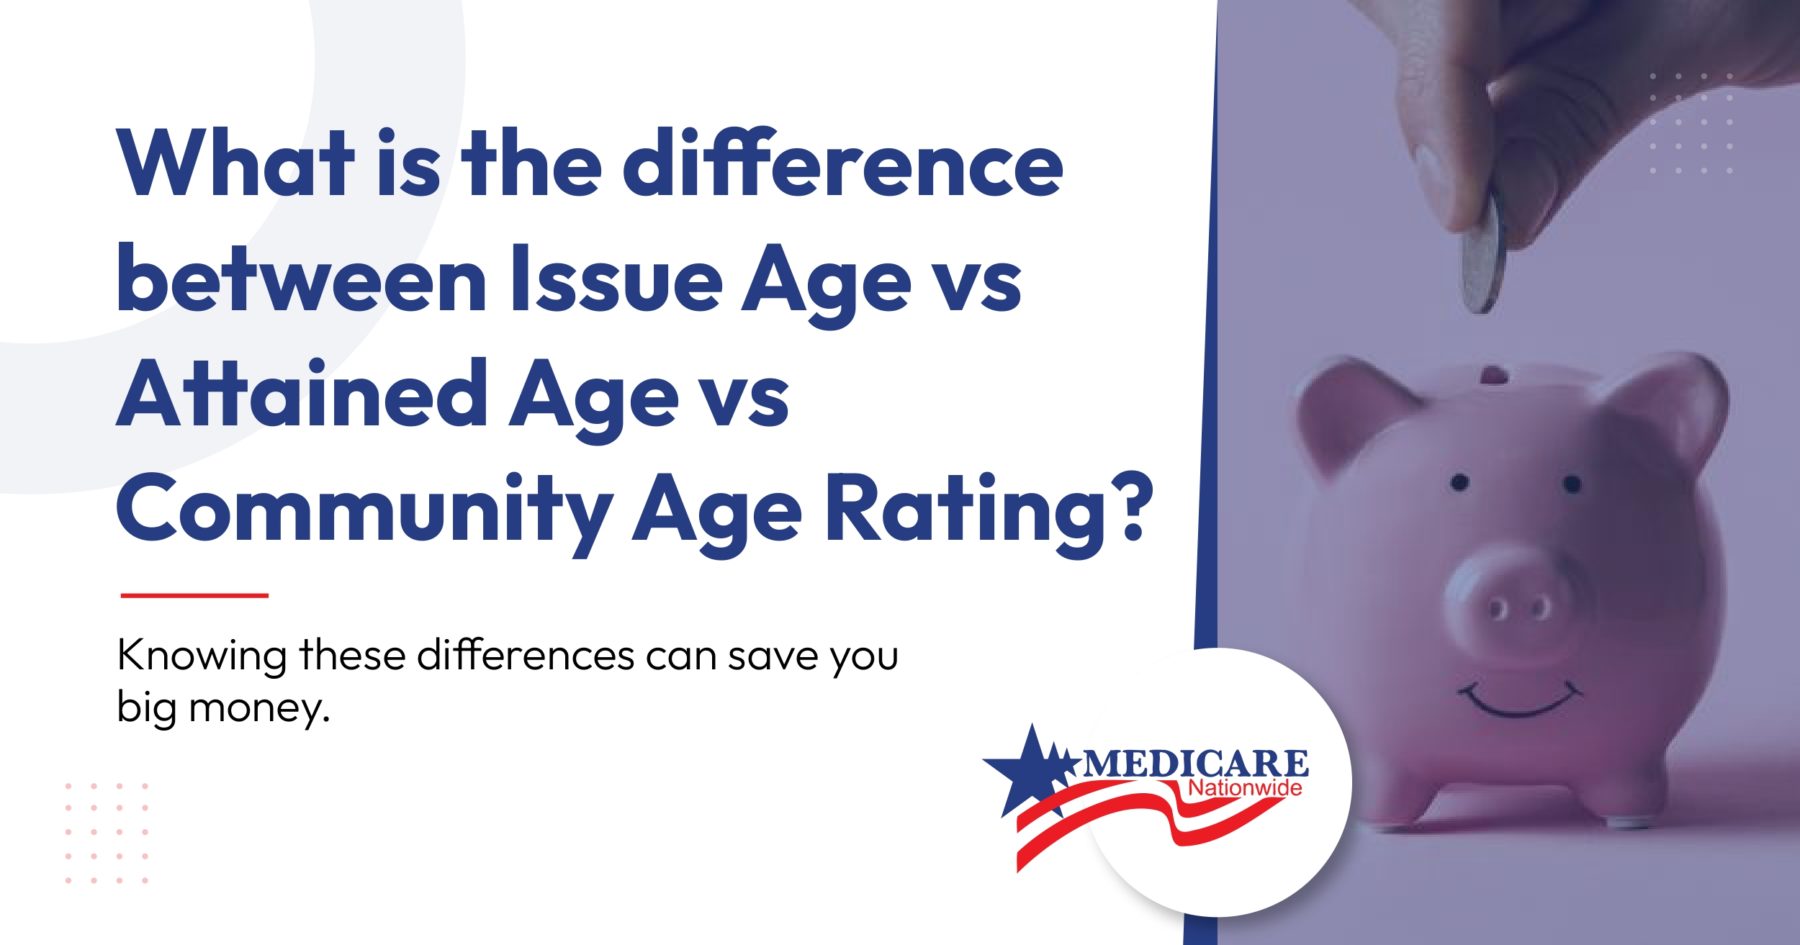 What is the difference between Issue Age vs Attained Age vs Community Age Rating?